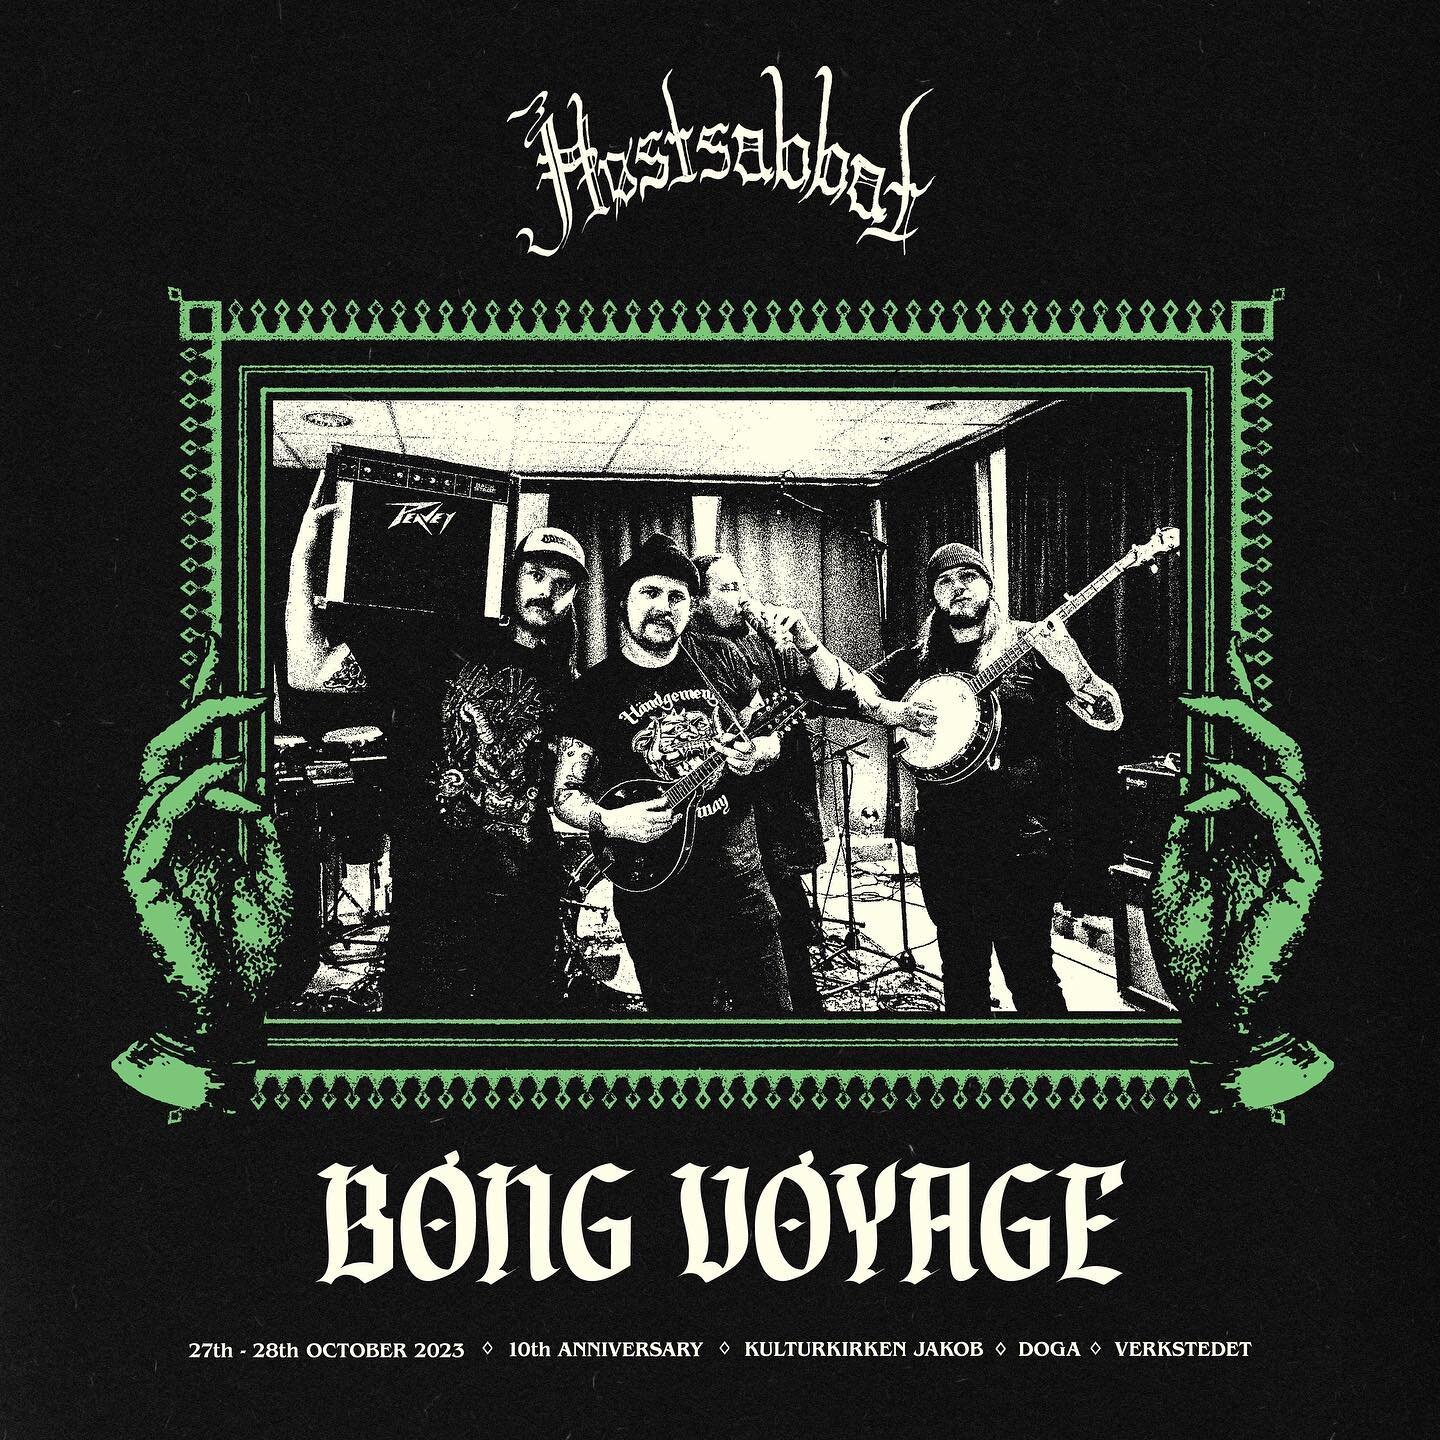 🔥BONG VOYAGE🔥

New bands appear for so many different reasons. Some because of ambition, some because of pure cynicism, some because of friendship. Some bands, like todays announcement, seem to grow out of something that is already flourishing with